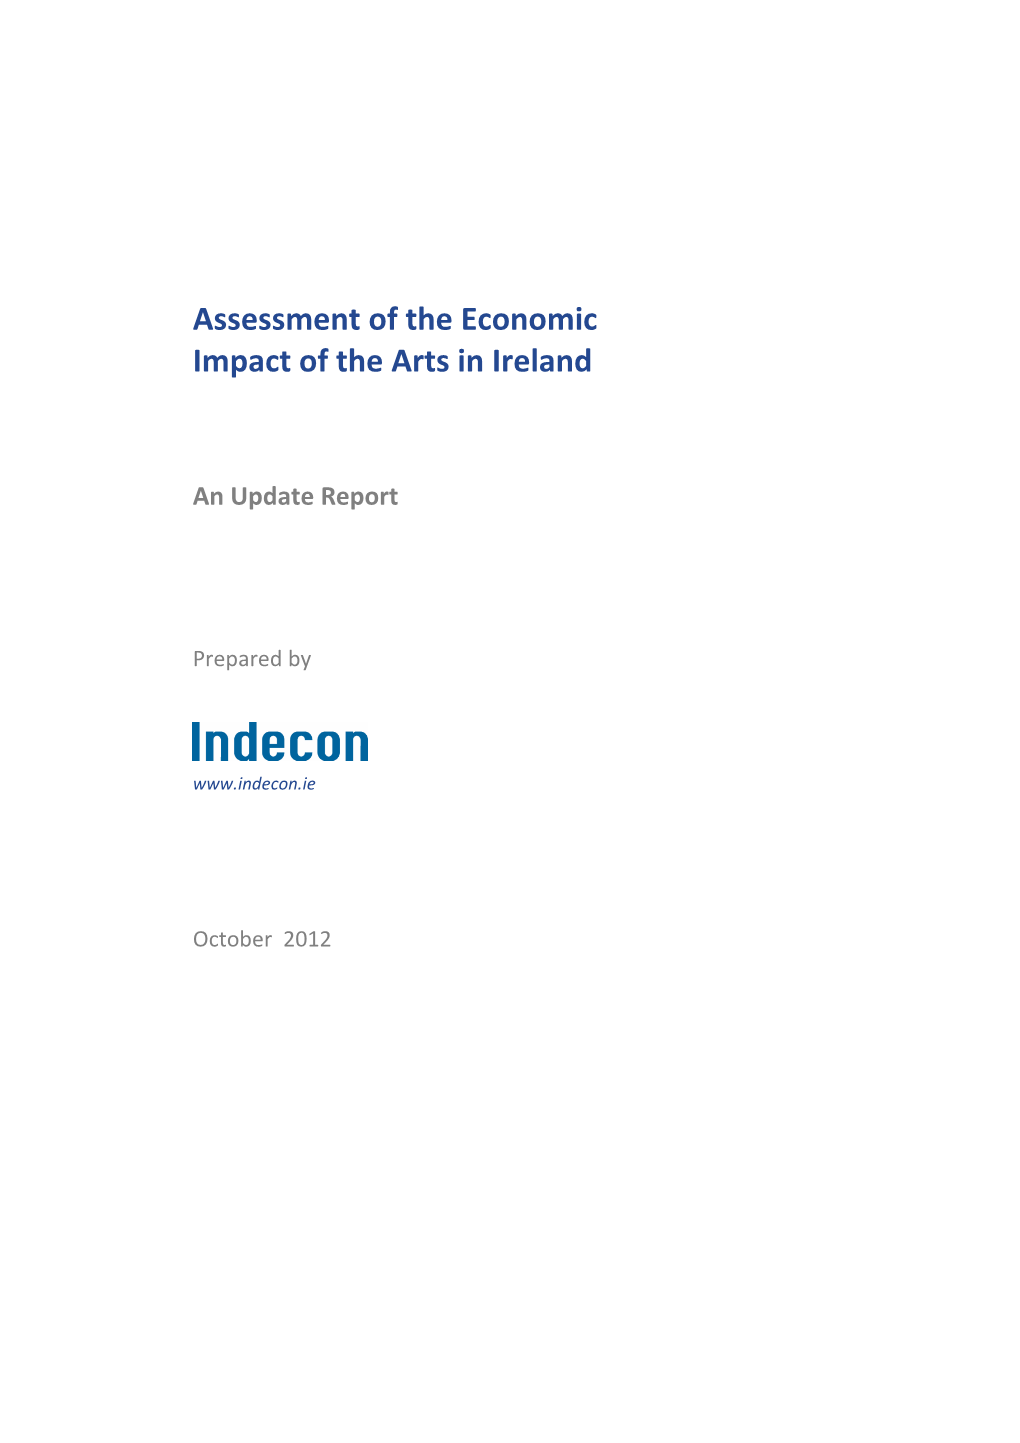 Assessment of the Economic Impact of the Arts in Ireland